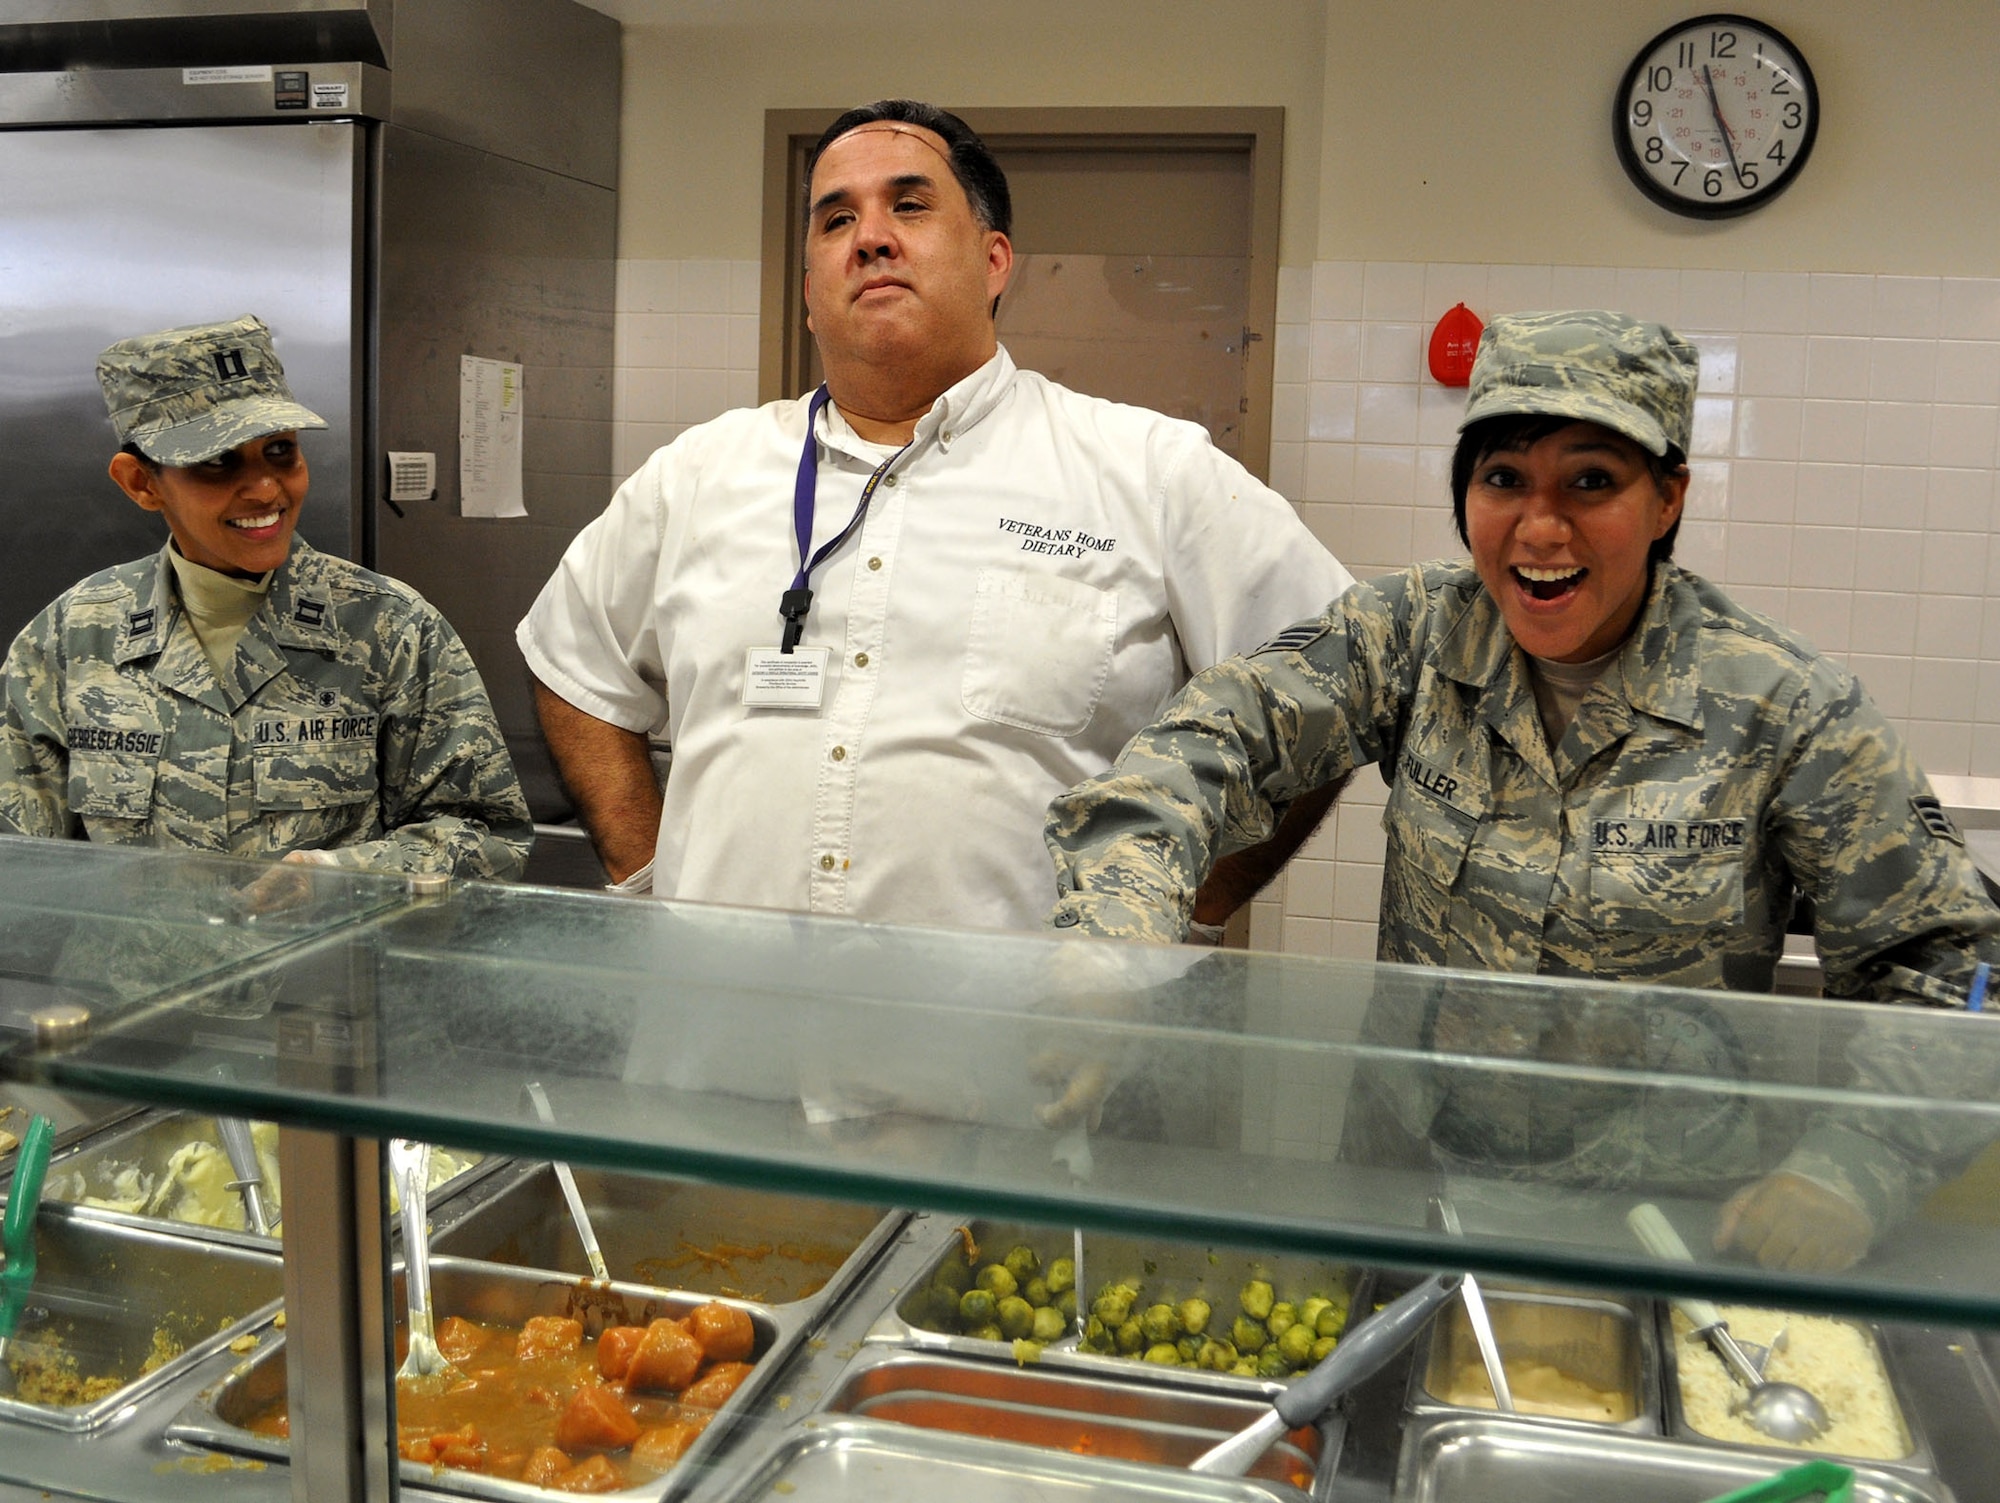 TRAVIS AIR FORCE BASE, Calif. -- Capt. Selamawit Gebreslassie and Senior Amn. Luz Fuller help the king of the Yountville kitchen crew serve up the Thanksgiving meal, at the Yountville Veterans Home. They joined about 130 Travis Airmen, to serve and visit with the veterans at the Home, who look forward to this yearly visit from those still in uniform. Gebreslassie is with the 349th Medical Squadron, and Fuller is with 349th Logistics Readiness Squadron. (U.S. Air Force photo/SMSgt. (ret) Ellen Hatfield)
